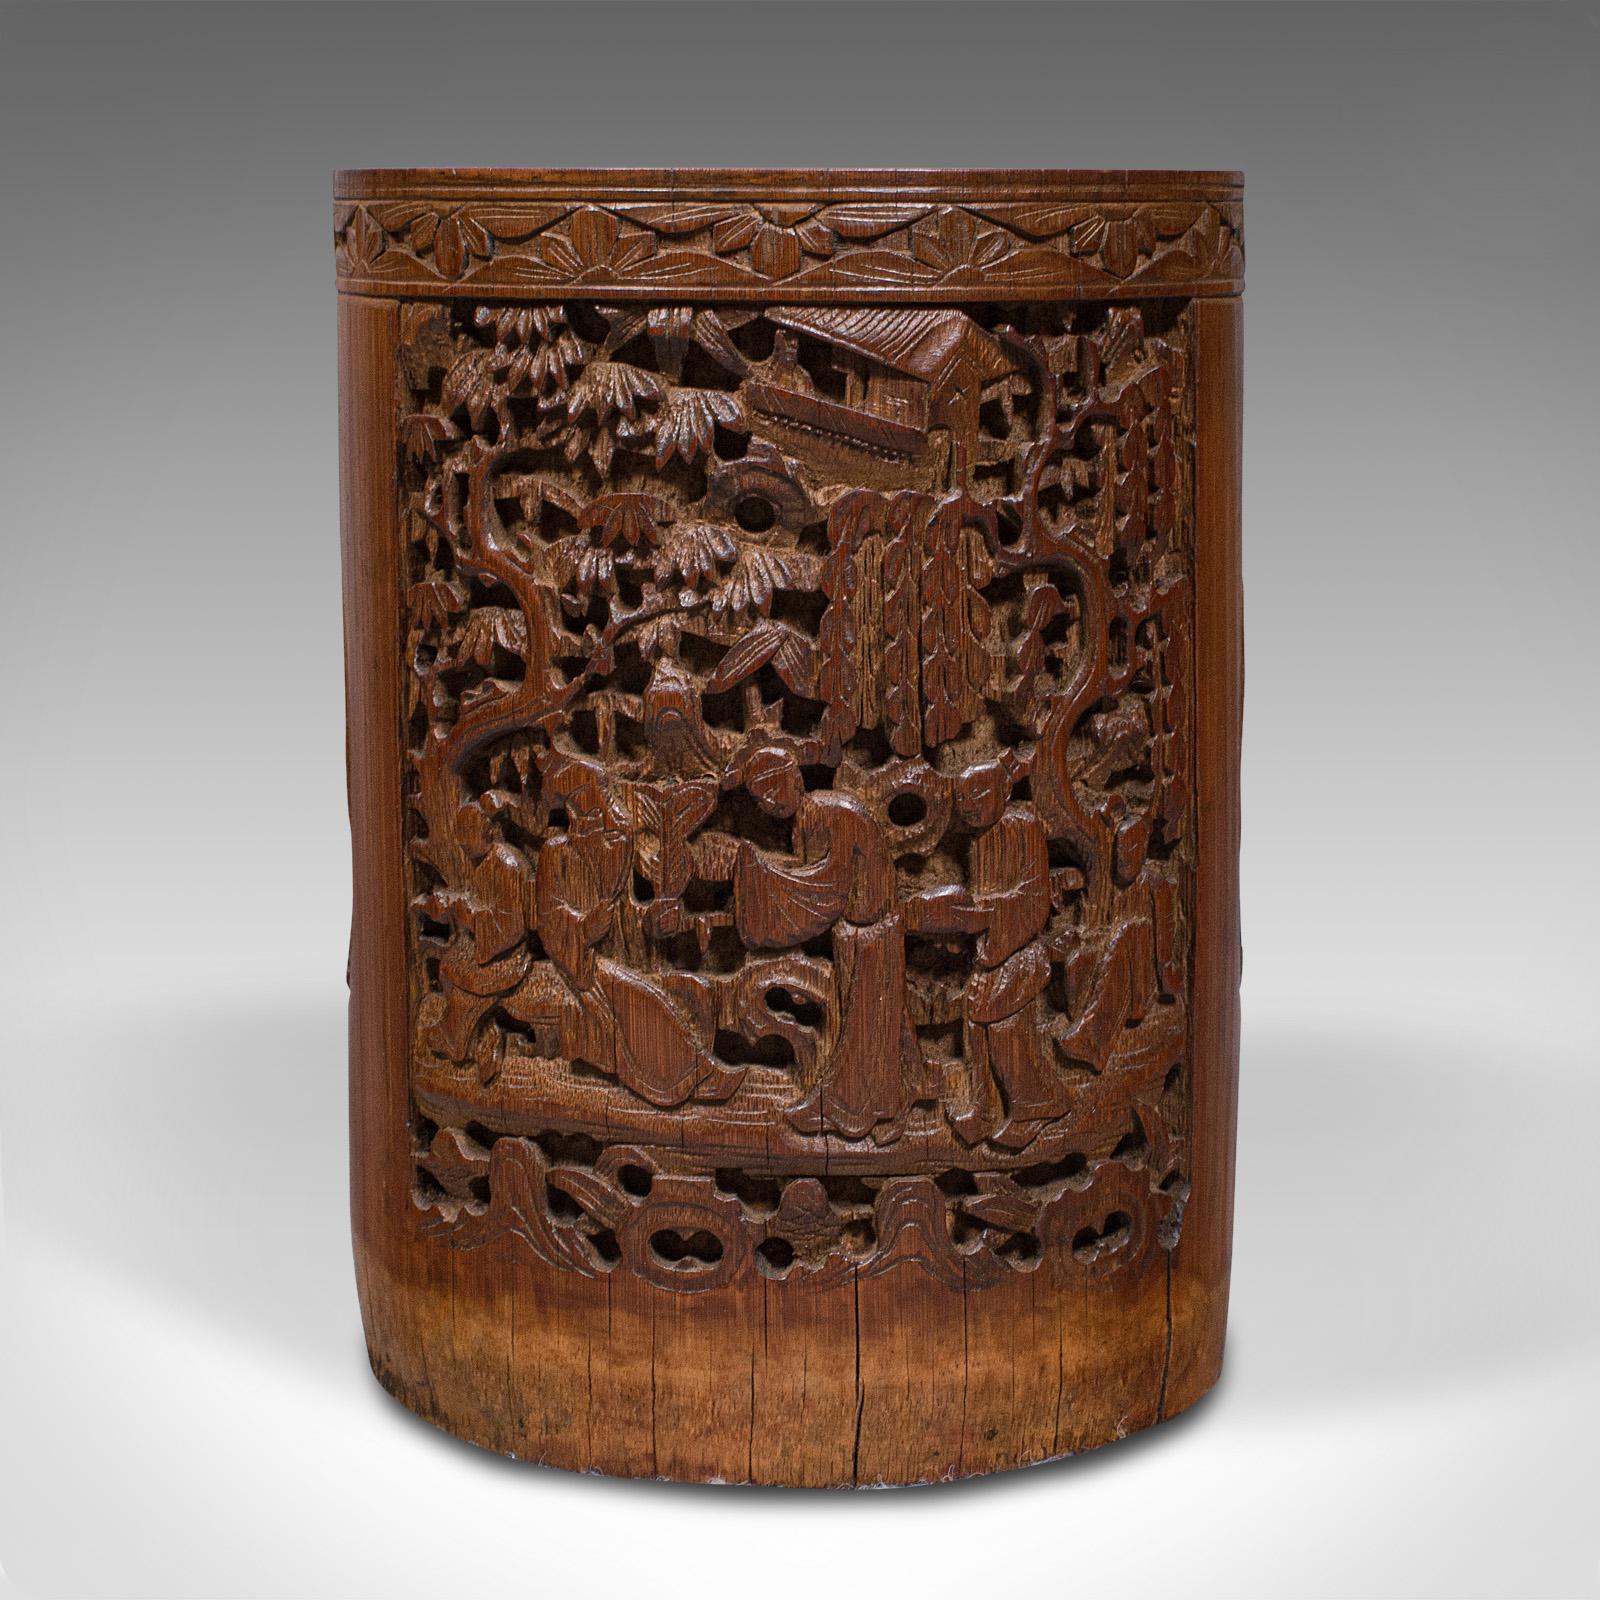 This is an antique artist's brush pot. A Chinese, carved bamboo treen, dating to the late Victorian period, circa 1900.

Enthusiastically carved detail within a broad bamboo trunk
Displaying a desirable aged patina and in good order
Bamboo shows